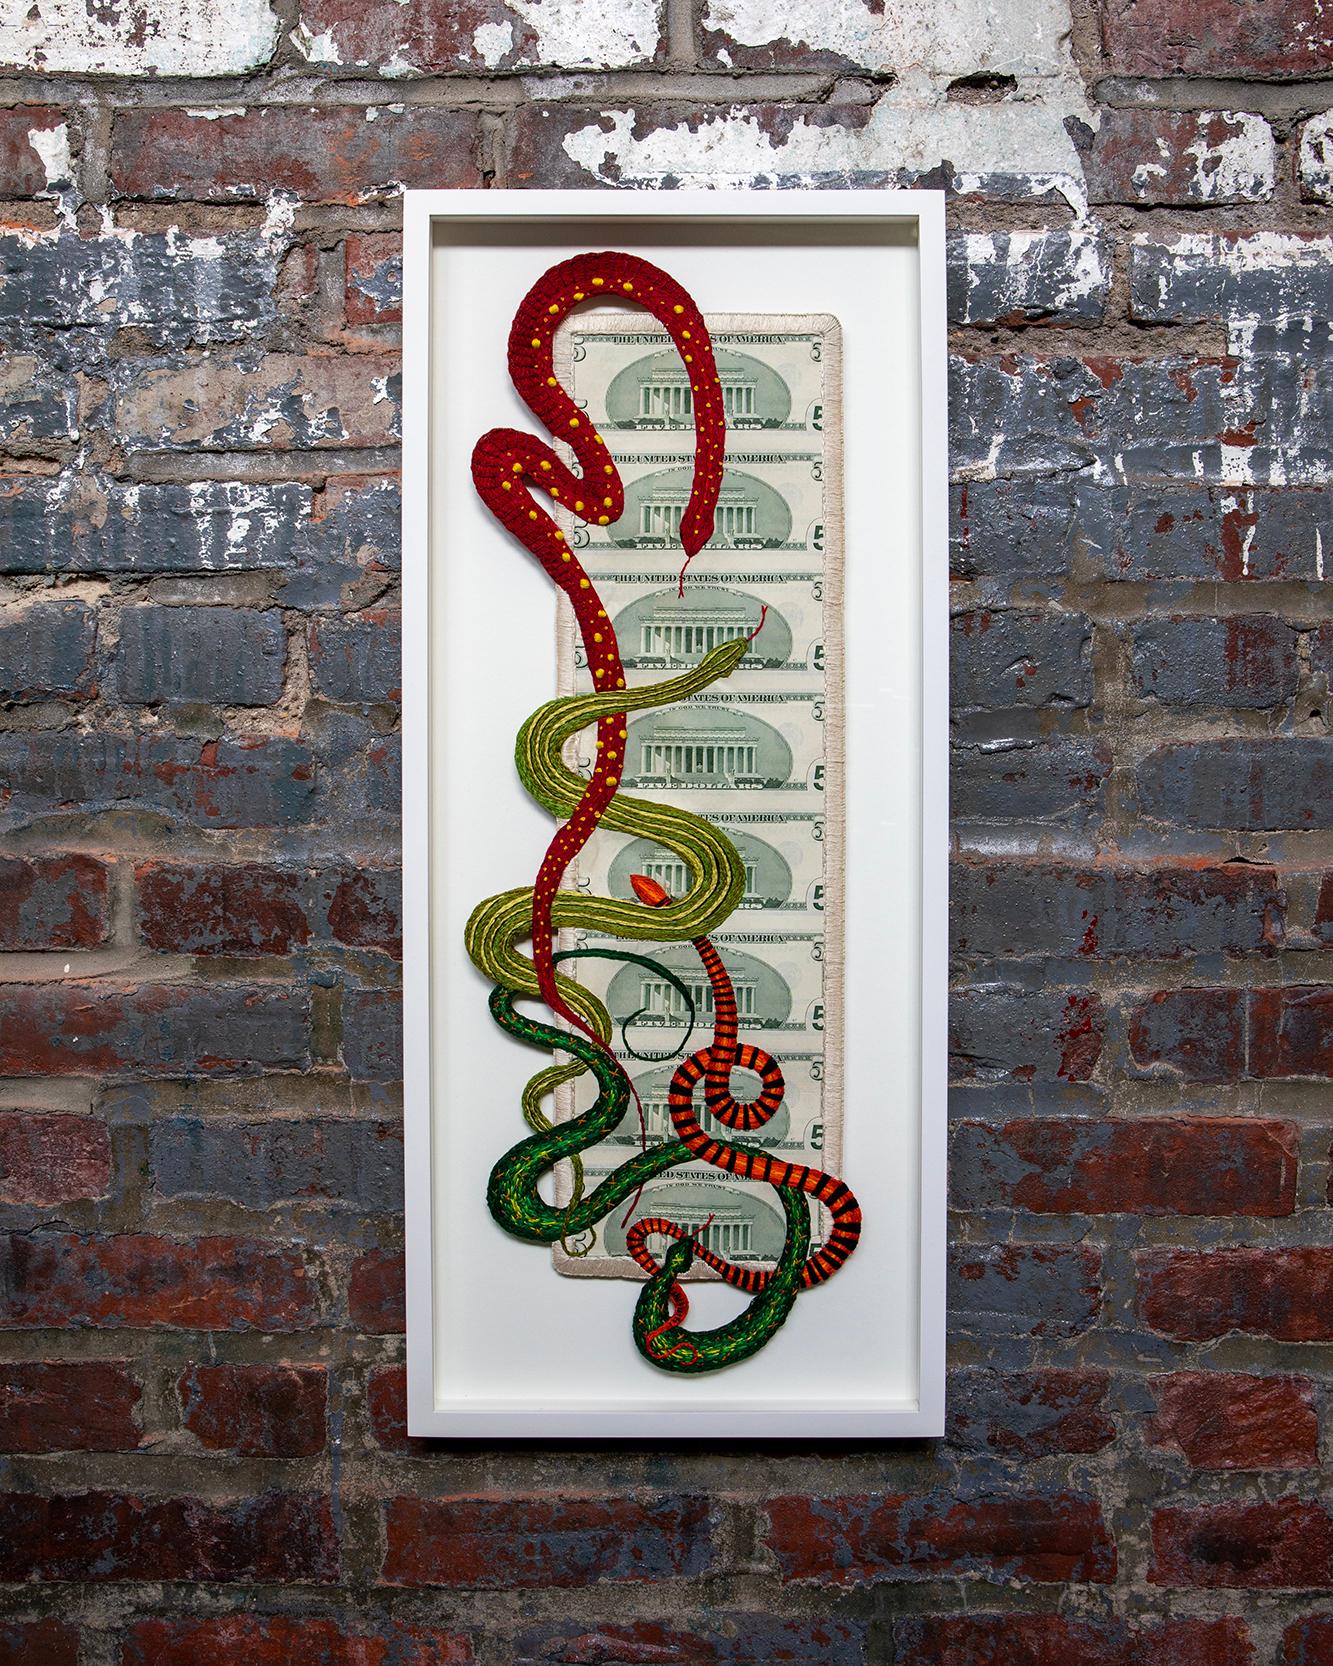 Lincoln Memorial Snakes - Mixed Media Art by Stacey Lee Webber